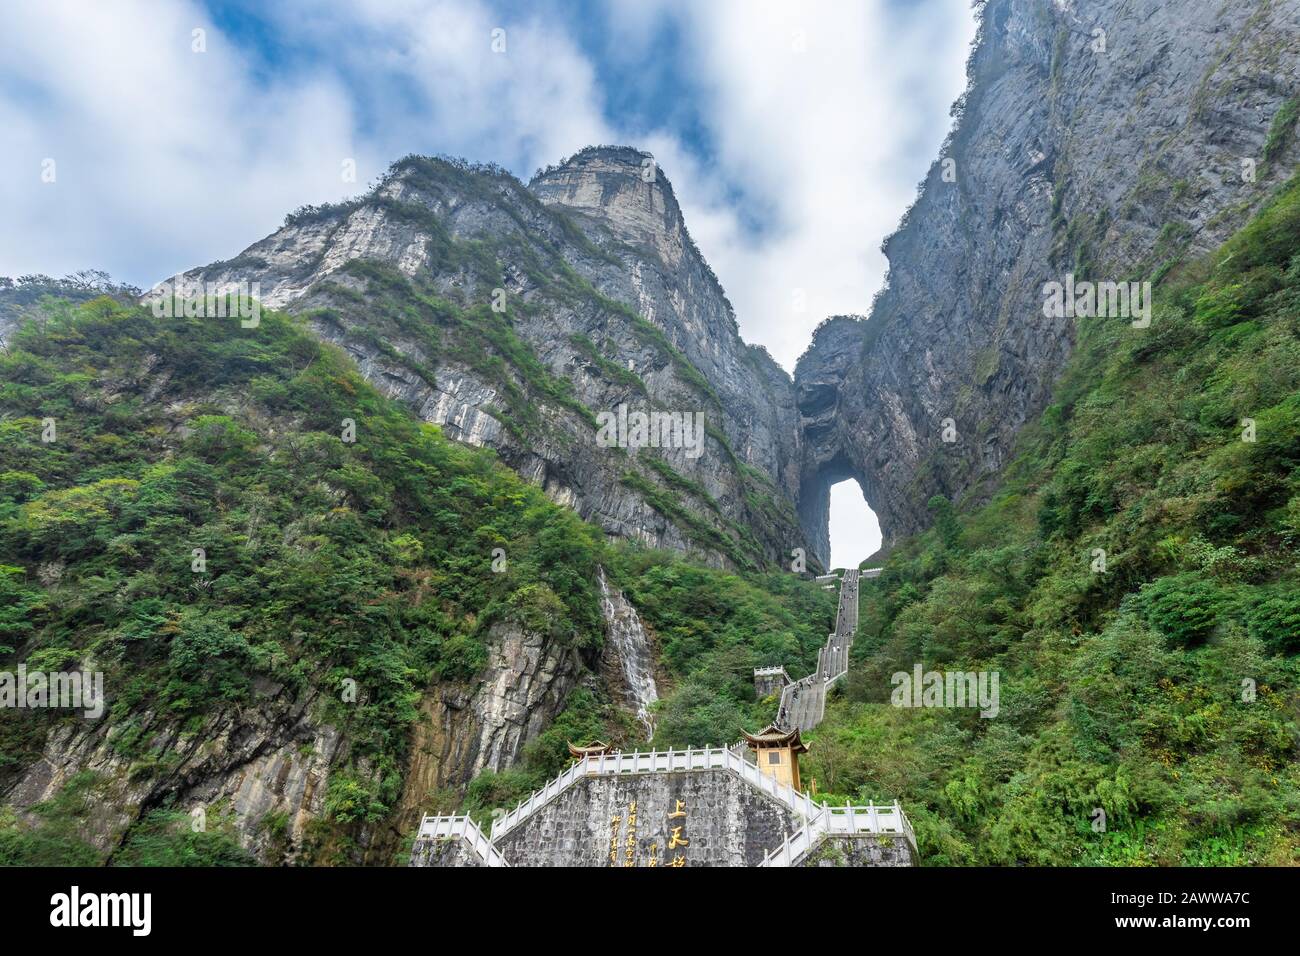 The Heaven's Gate of Tianmen Mountain National Park with 999 step stairway on a cloudy day with blue sky, Zhangjiajie, Changsha, Hunan, China Stock Photo